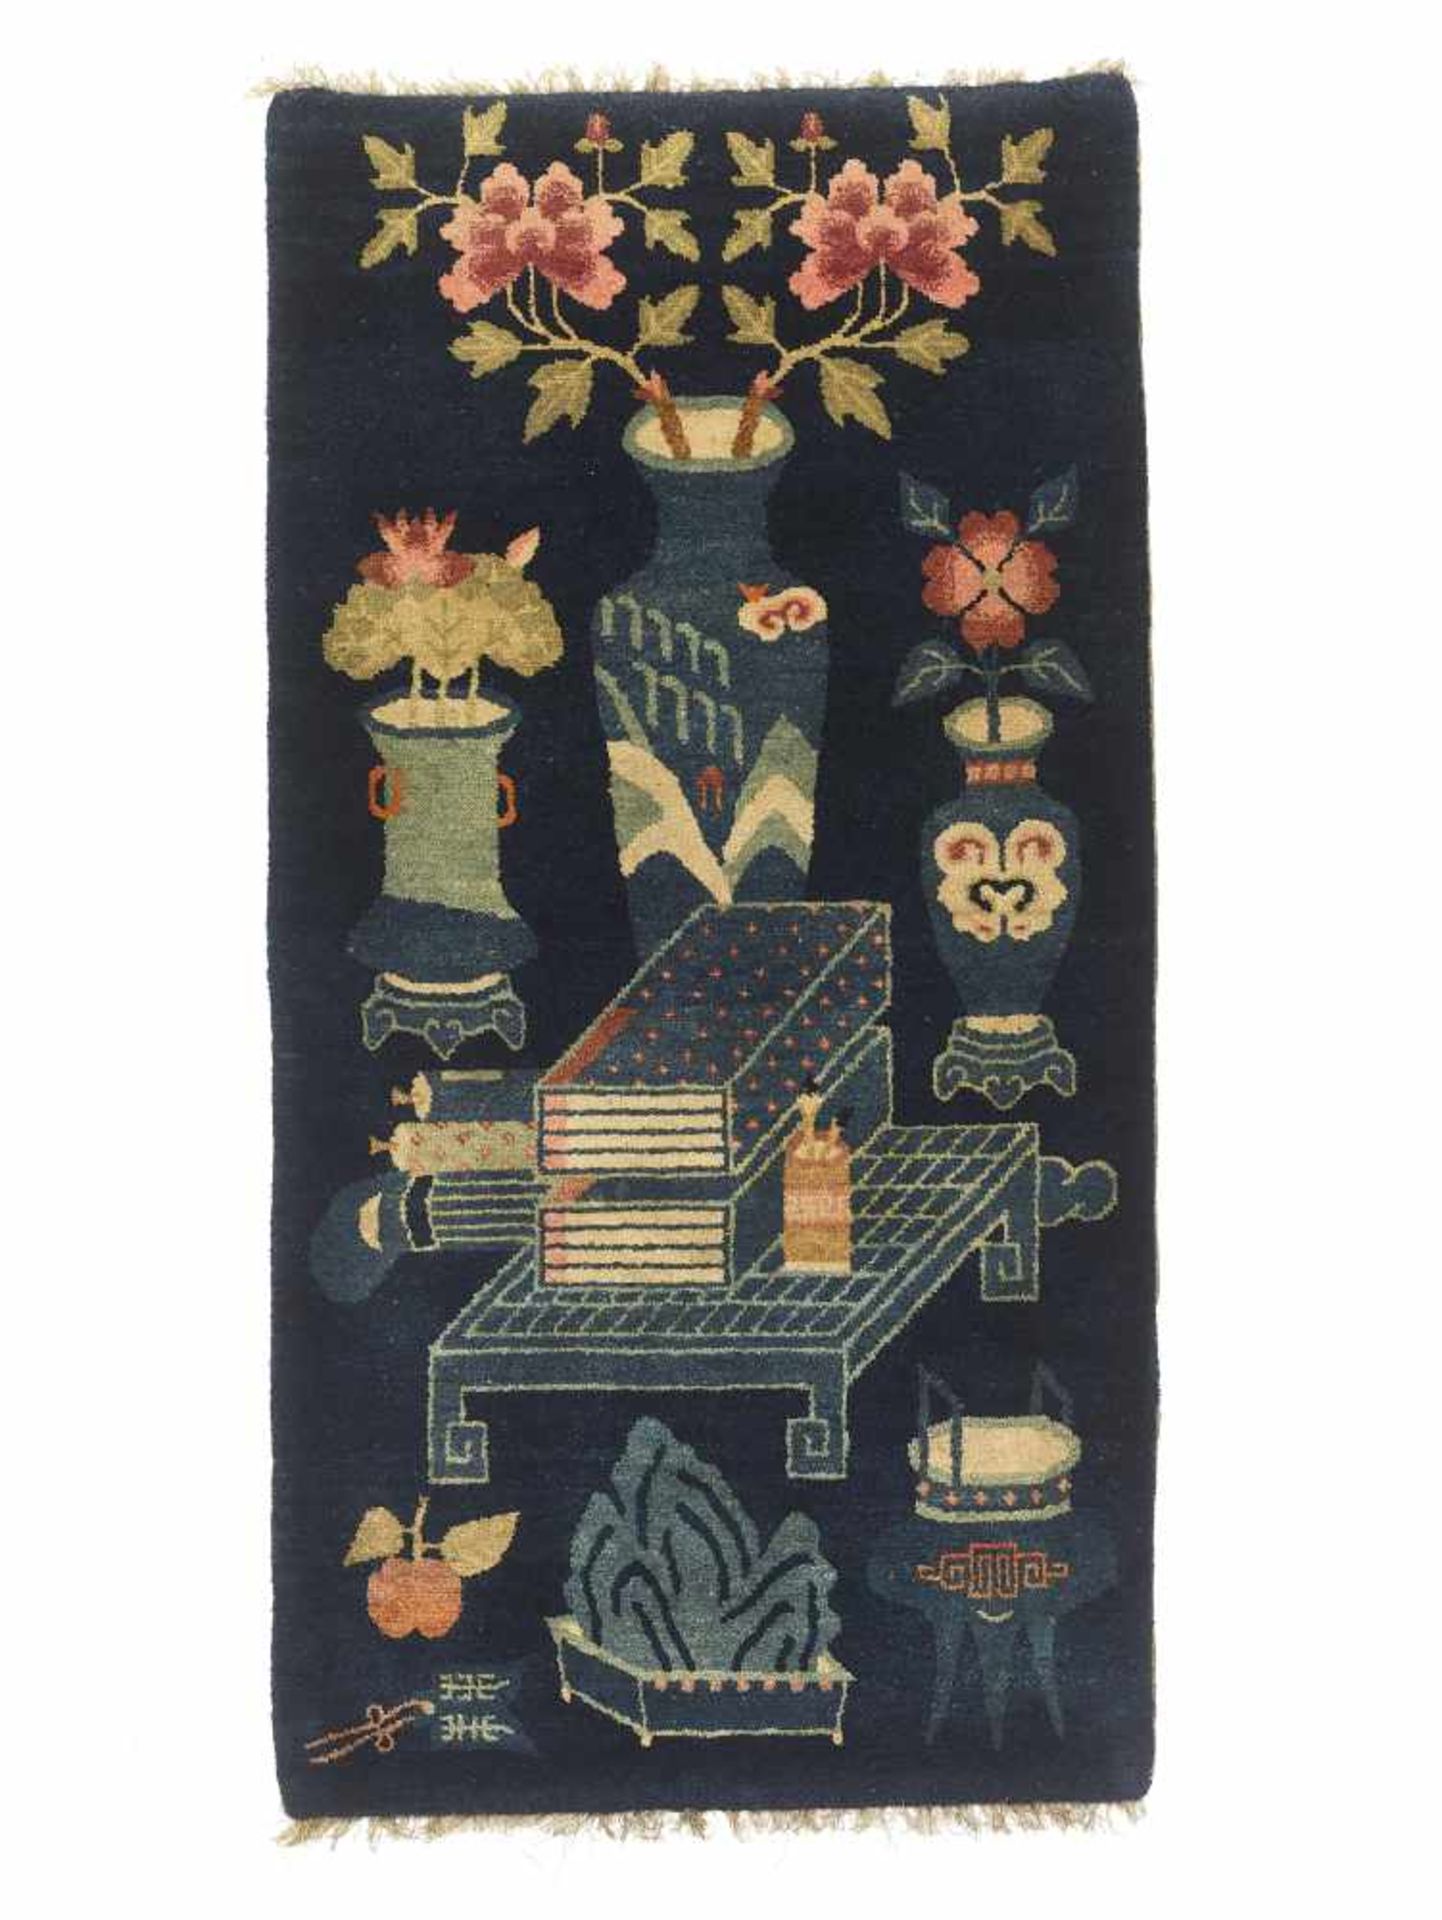 A SMALL NINGXIA RUG, QINGChina, 19th century. Finely woven wool rug with a palace still life showing